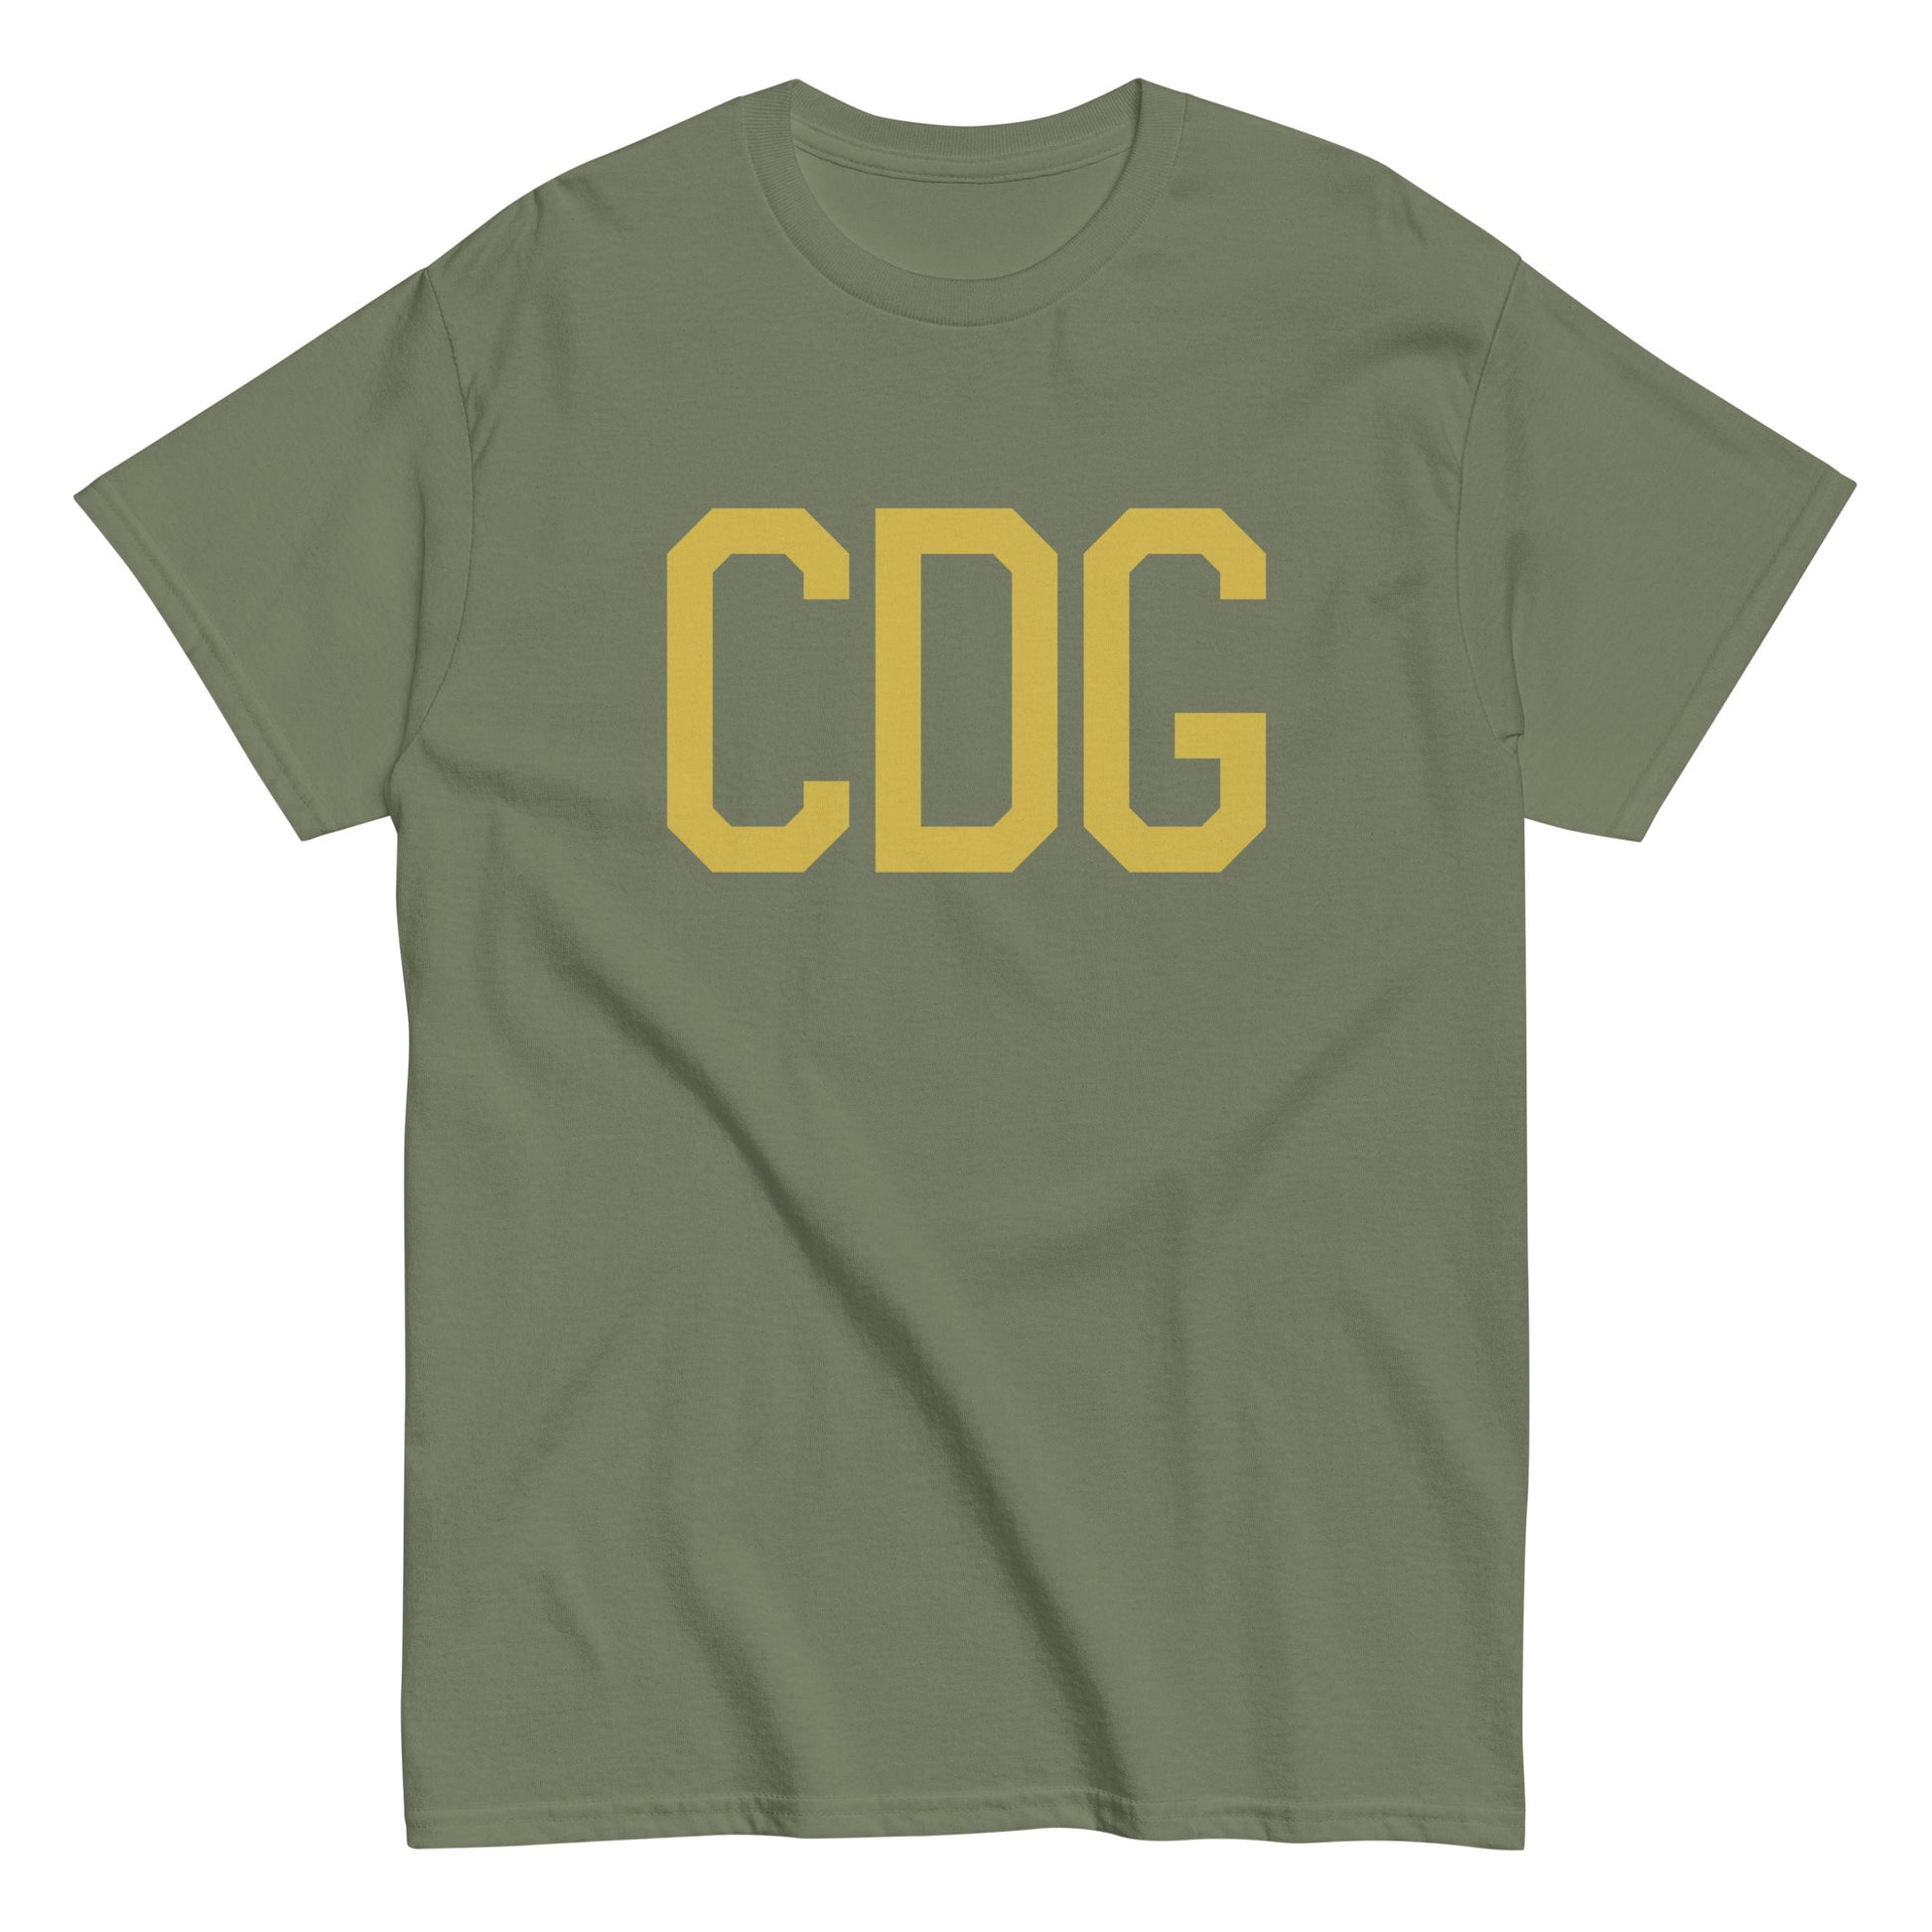 Aviation Enthusiast Men's Tee - Old Gold Graphic • CDG Paris • YHM Designs - Image 02